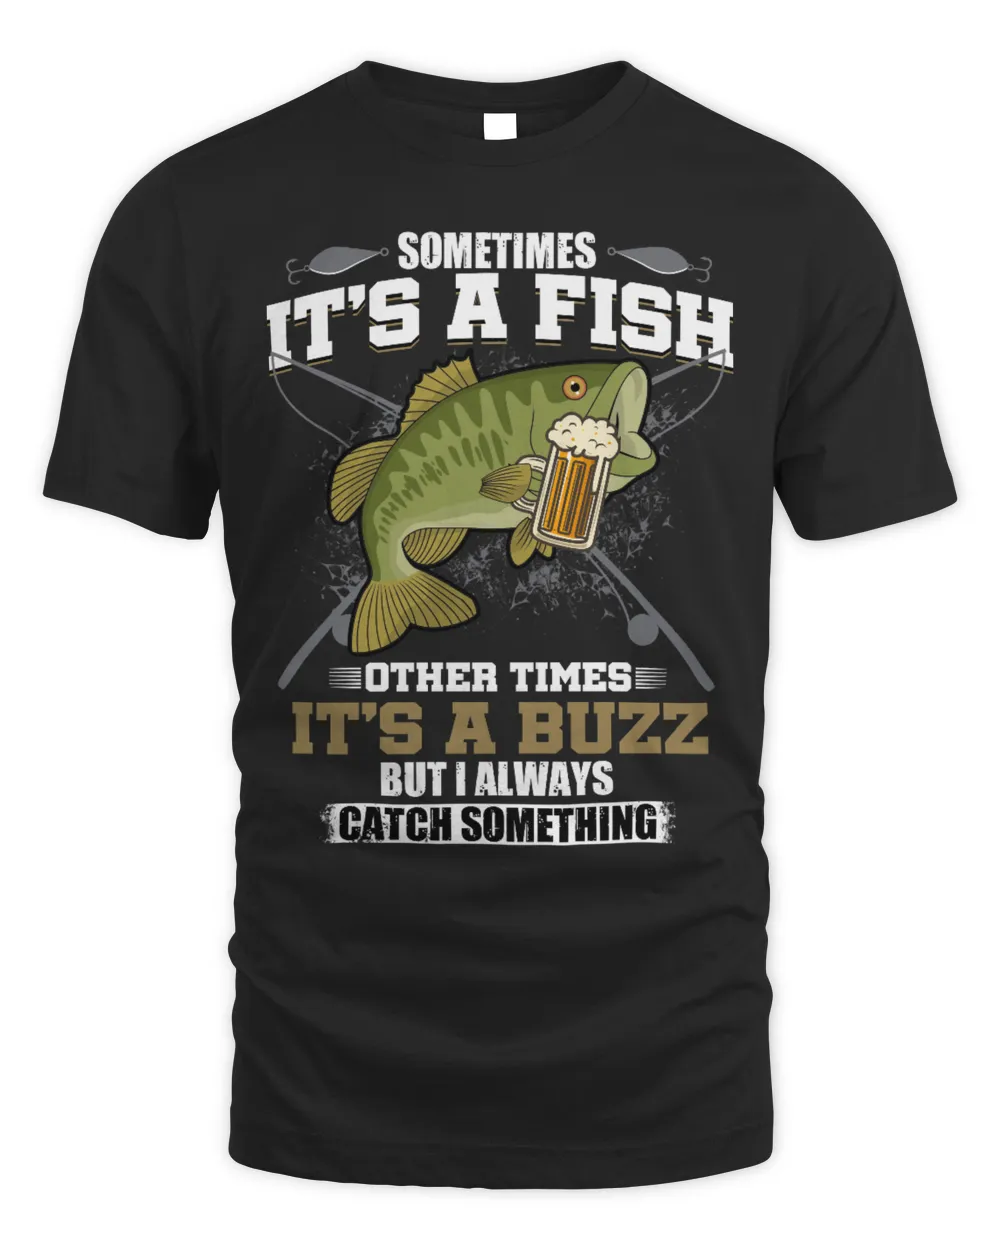 Sometimes it's a fish o ther time it's a buzz...